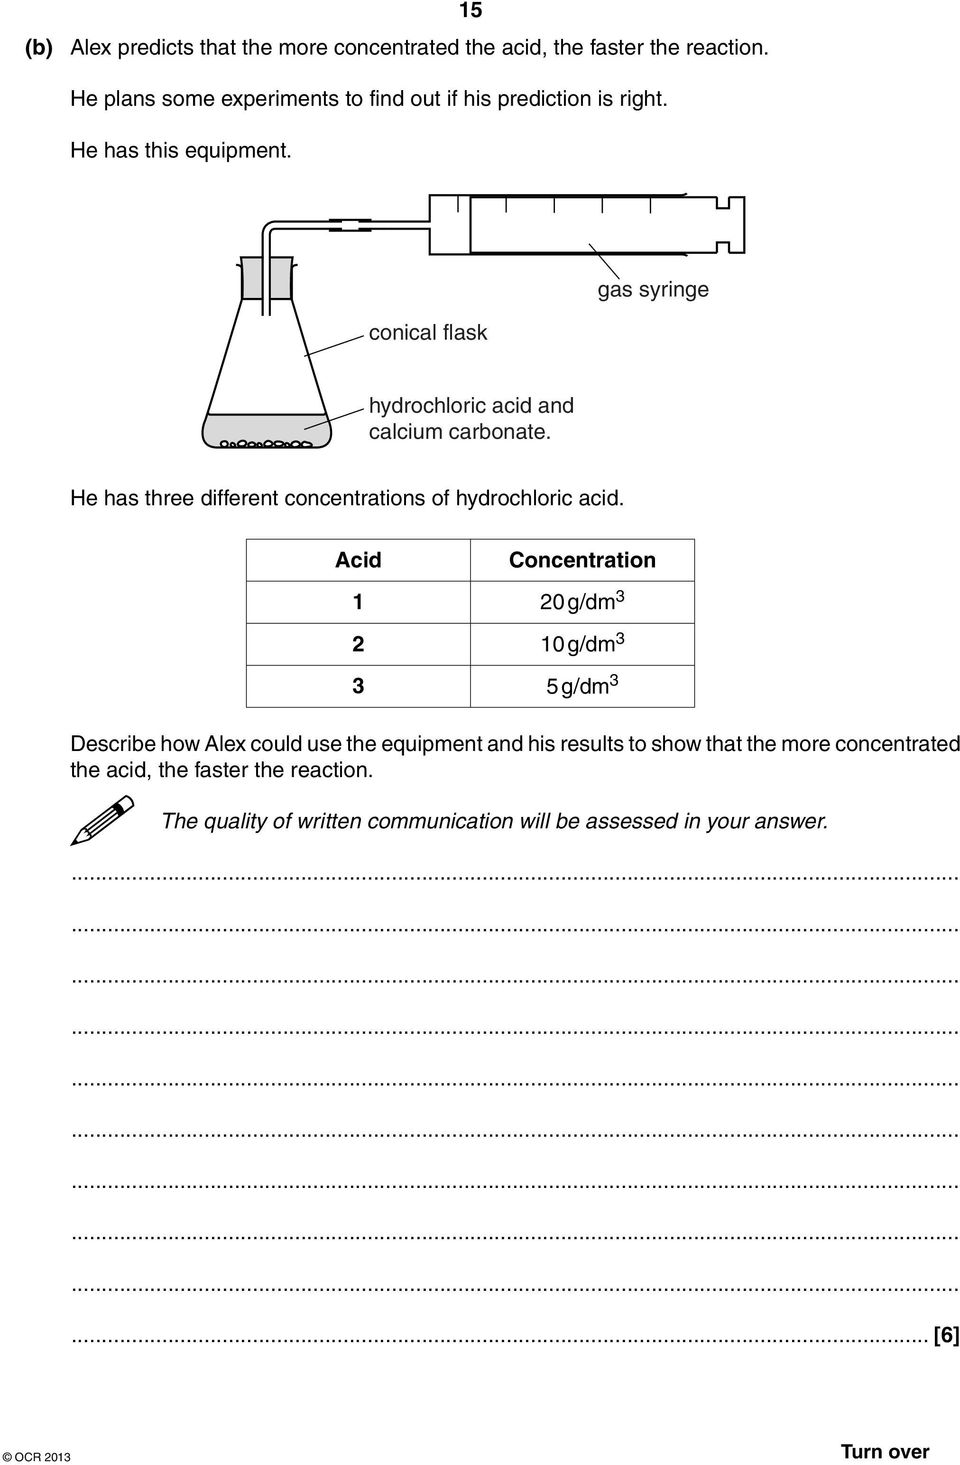 conical flask gas syringe hydrochloric acid and calcium carbonate. He has three different concentrations of hydrochloric acid.